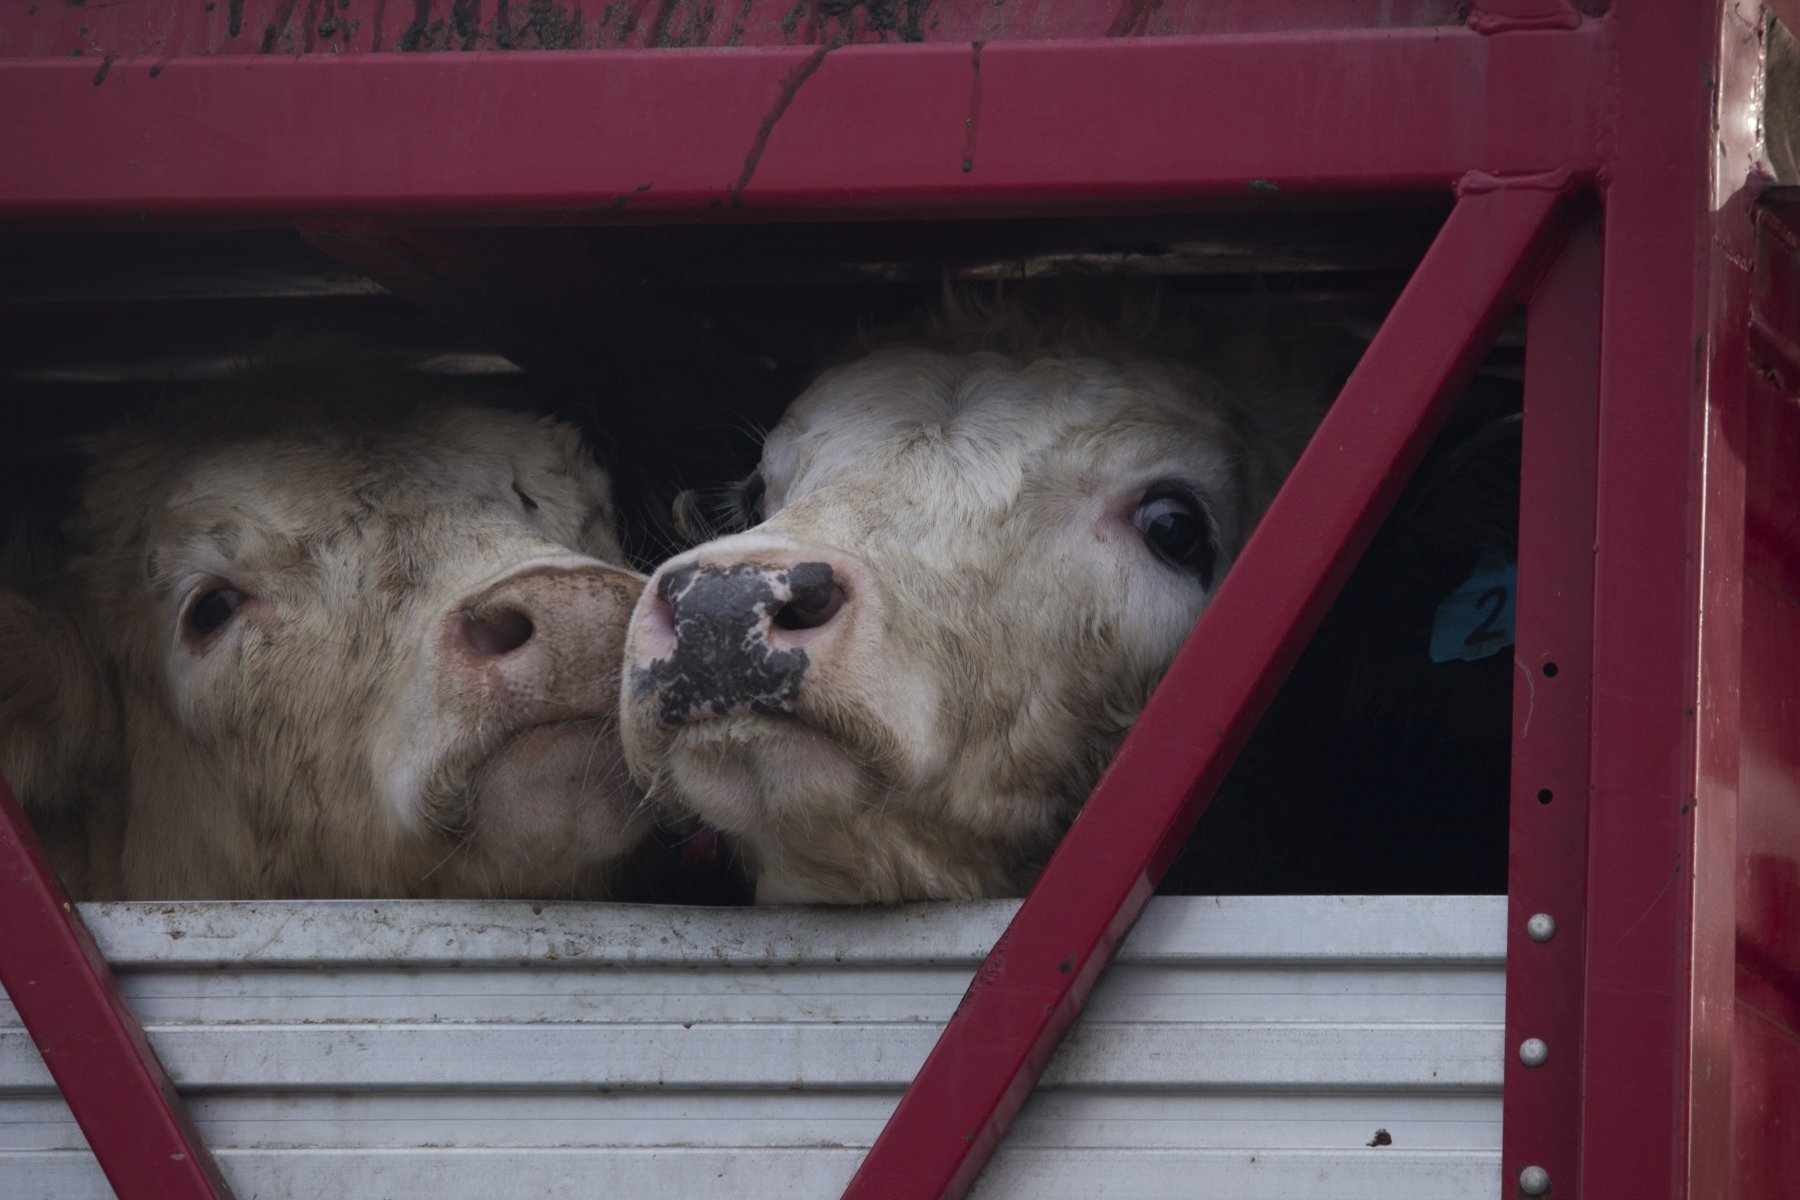 Cows on trucks bound for the slaughterhouse.